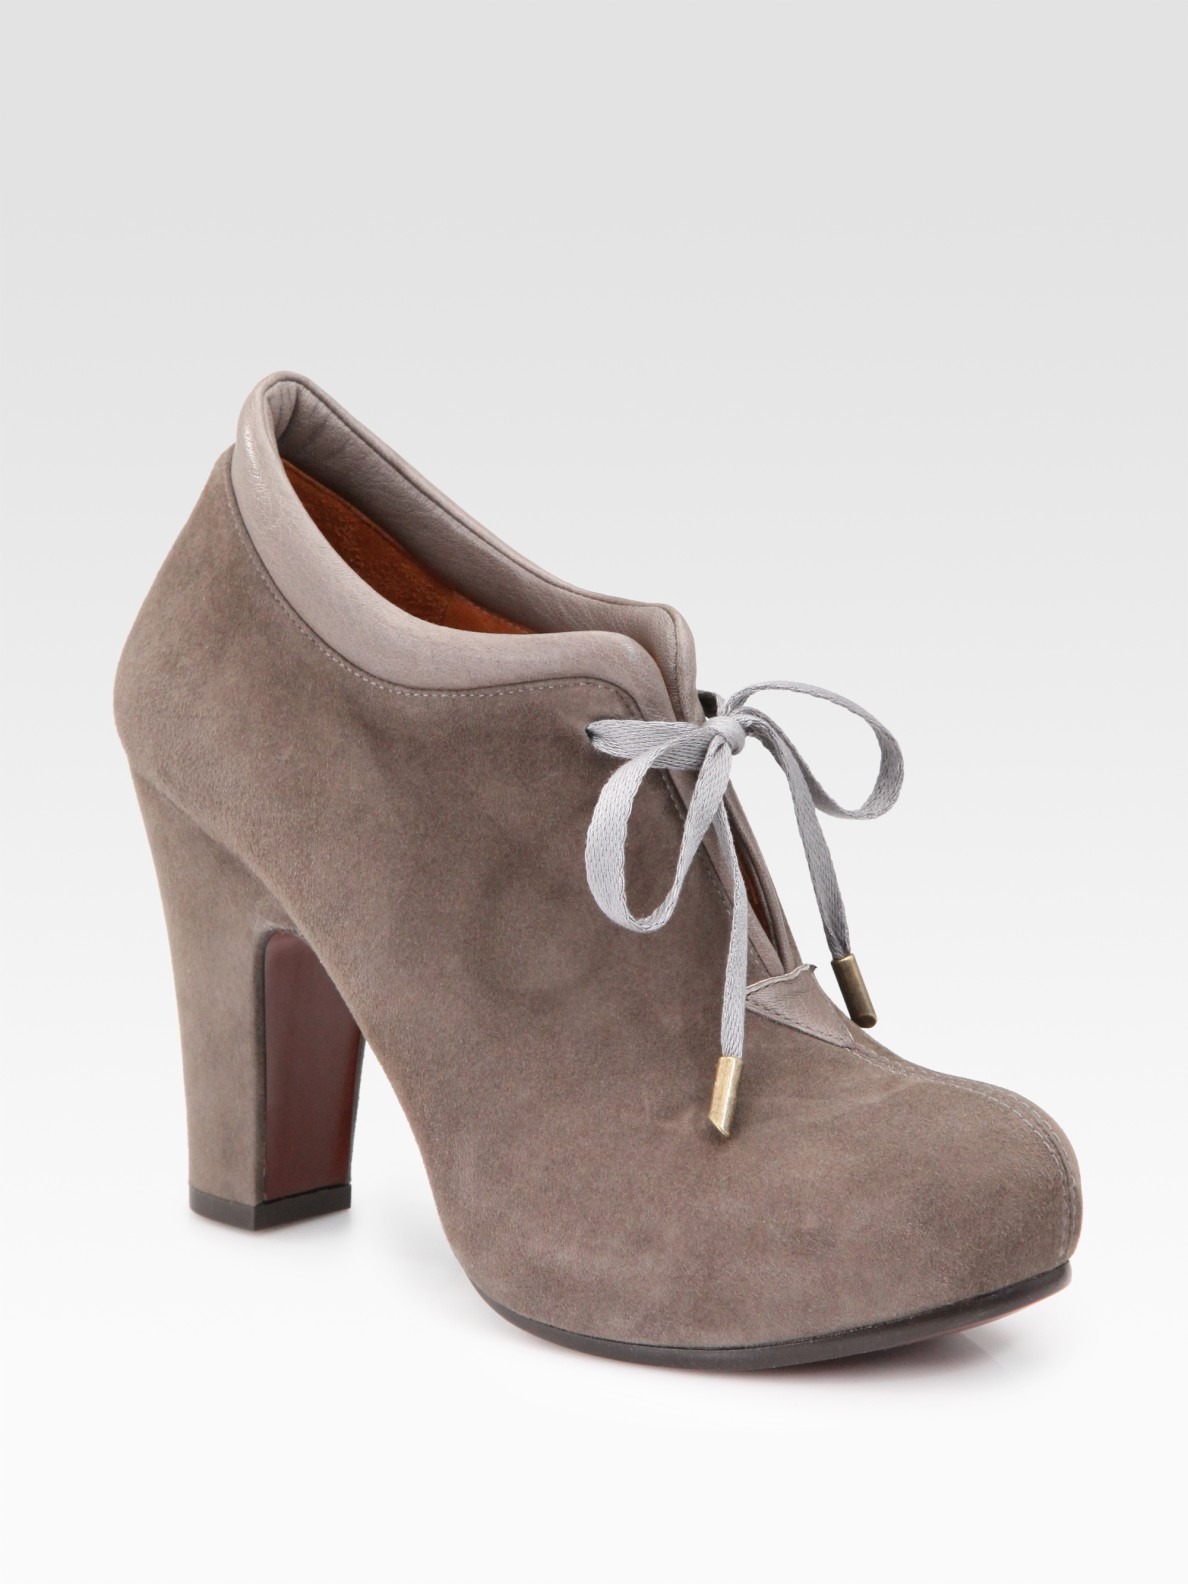 Chie Mihara Olga Suede Lace-up Ankle Boots in Brown (taupe) | Lyst